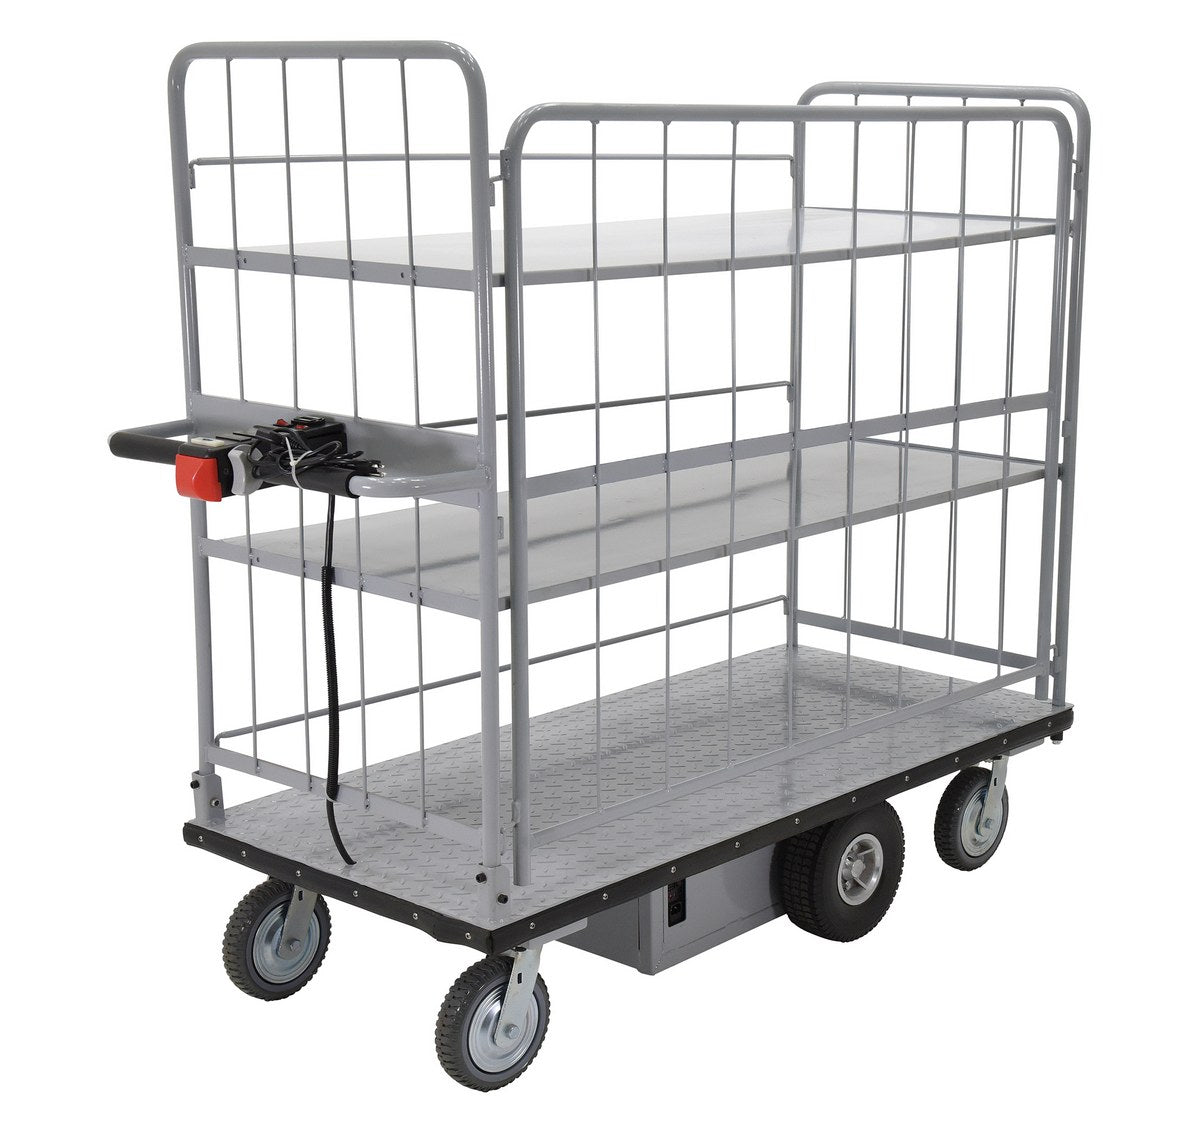 Steel Electric Material Handling Cart with Sides 2 Shelves 28 In. x 60 In. 500 Lb. Capacity Gray